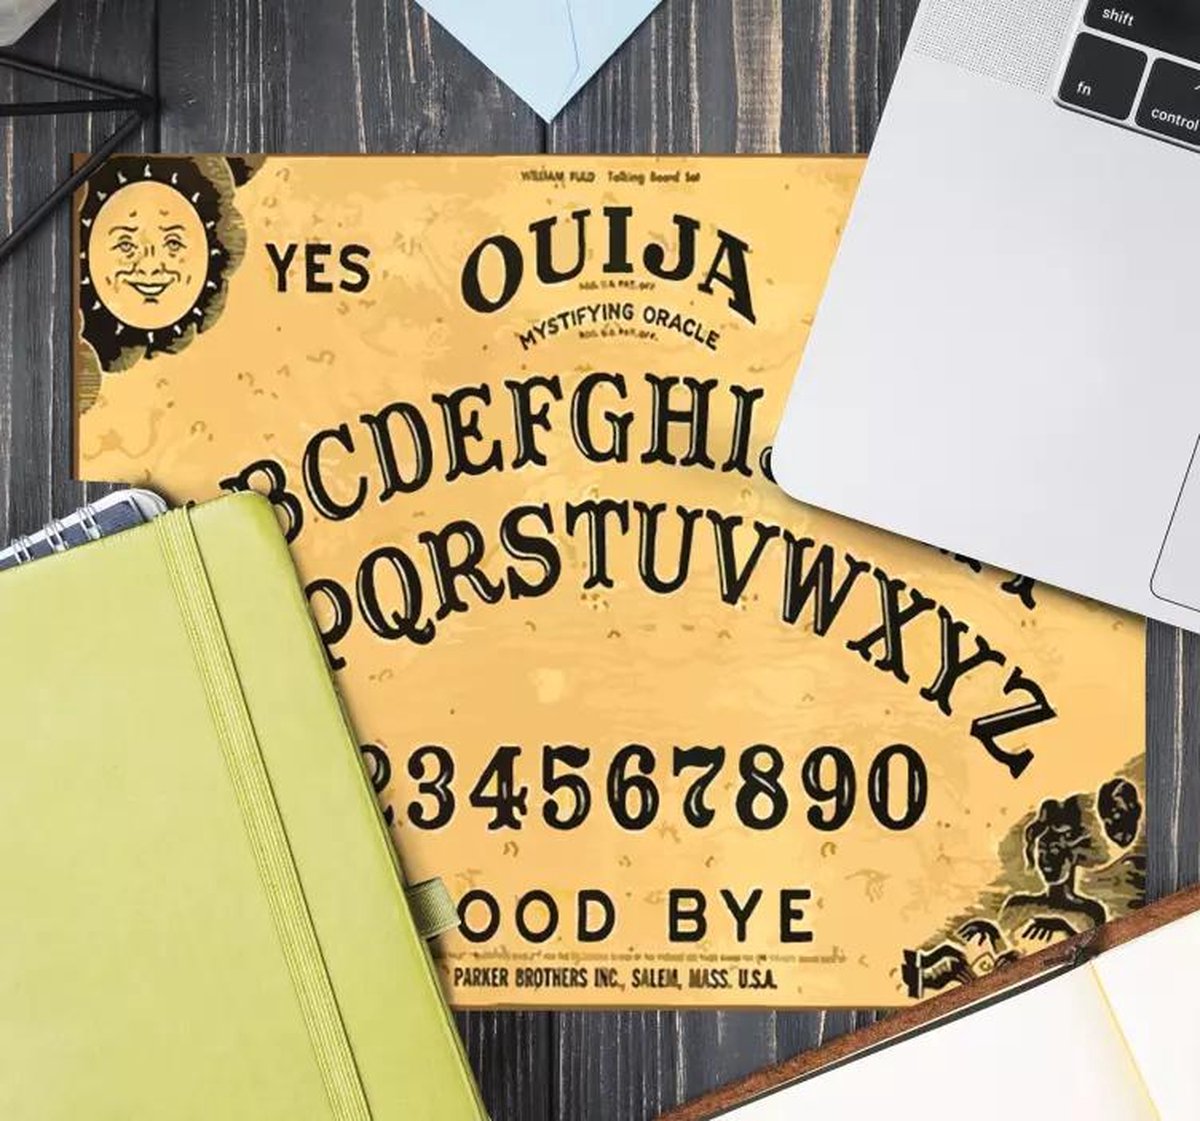 ouija muismat ghost hunting spooky comupter laptop